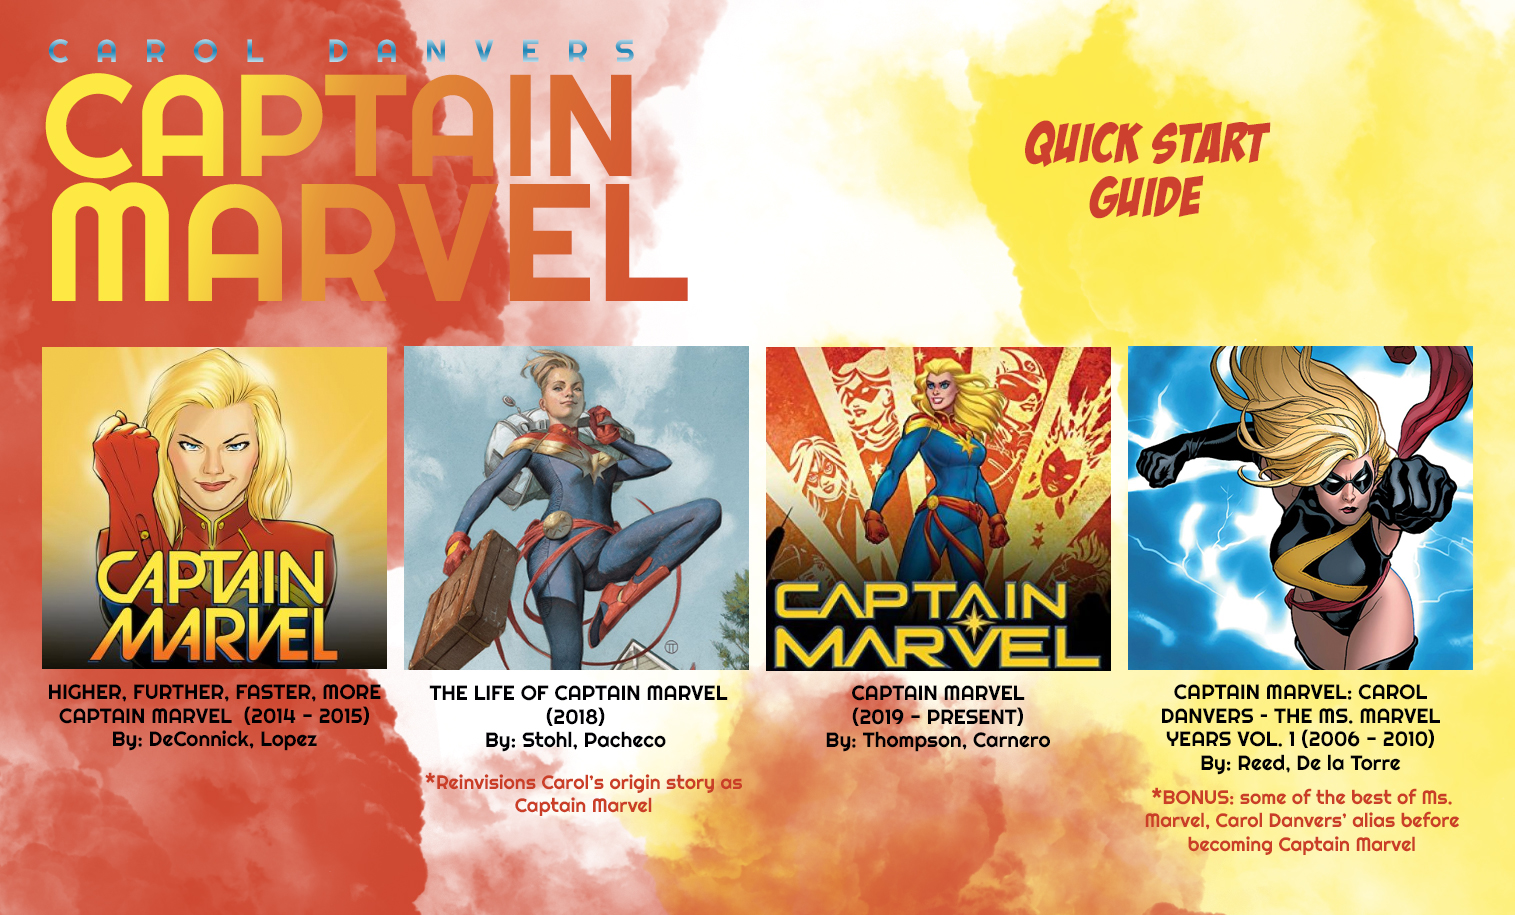 Quick Start guide to Captain Marvel